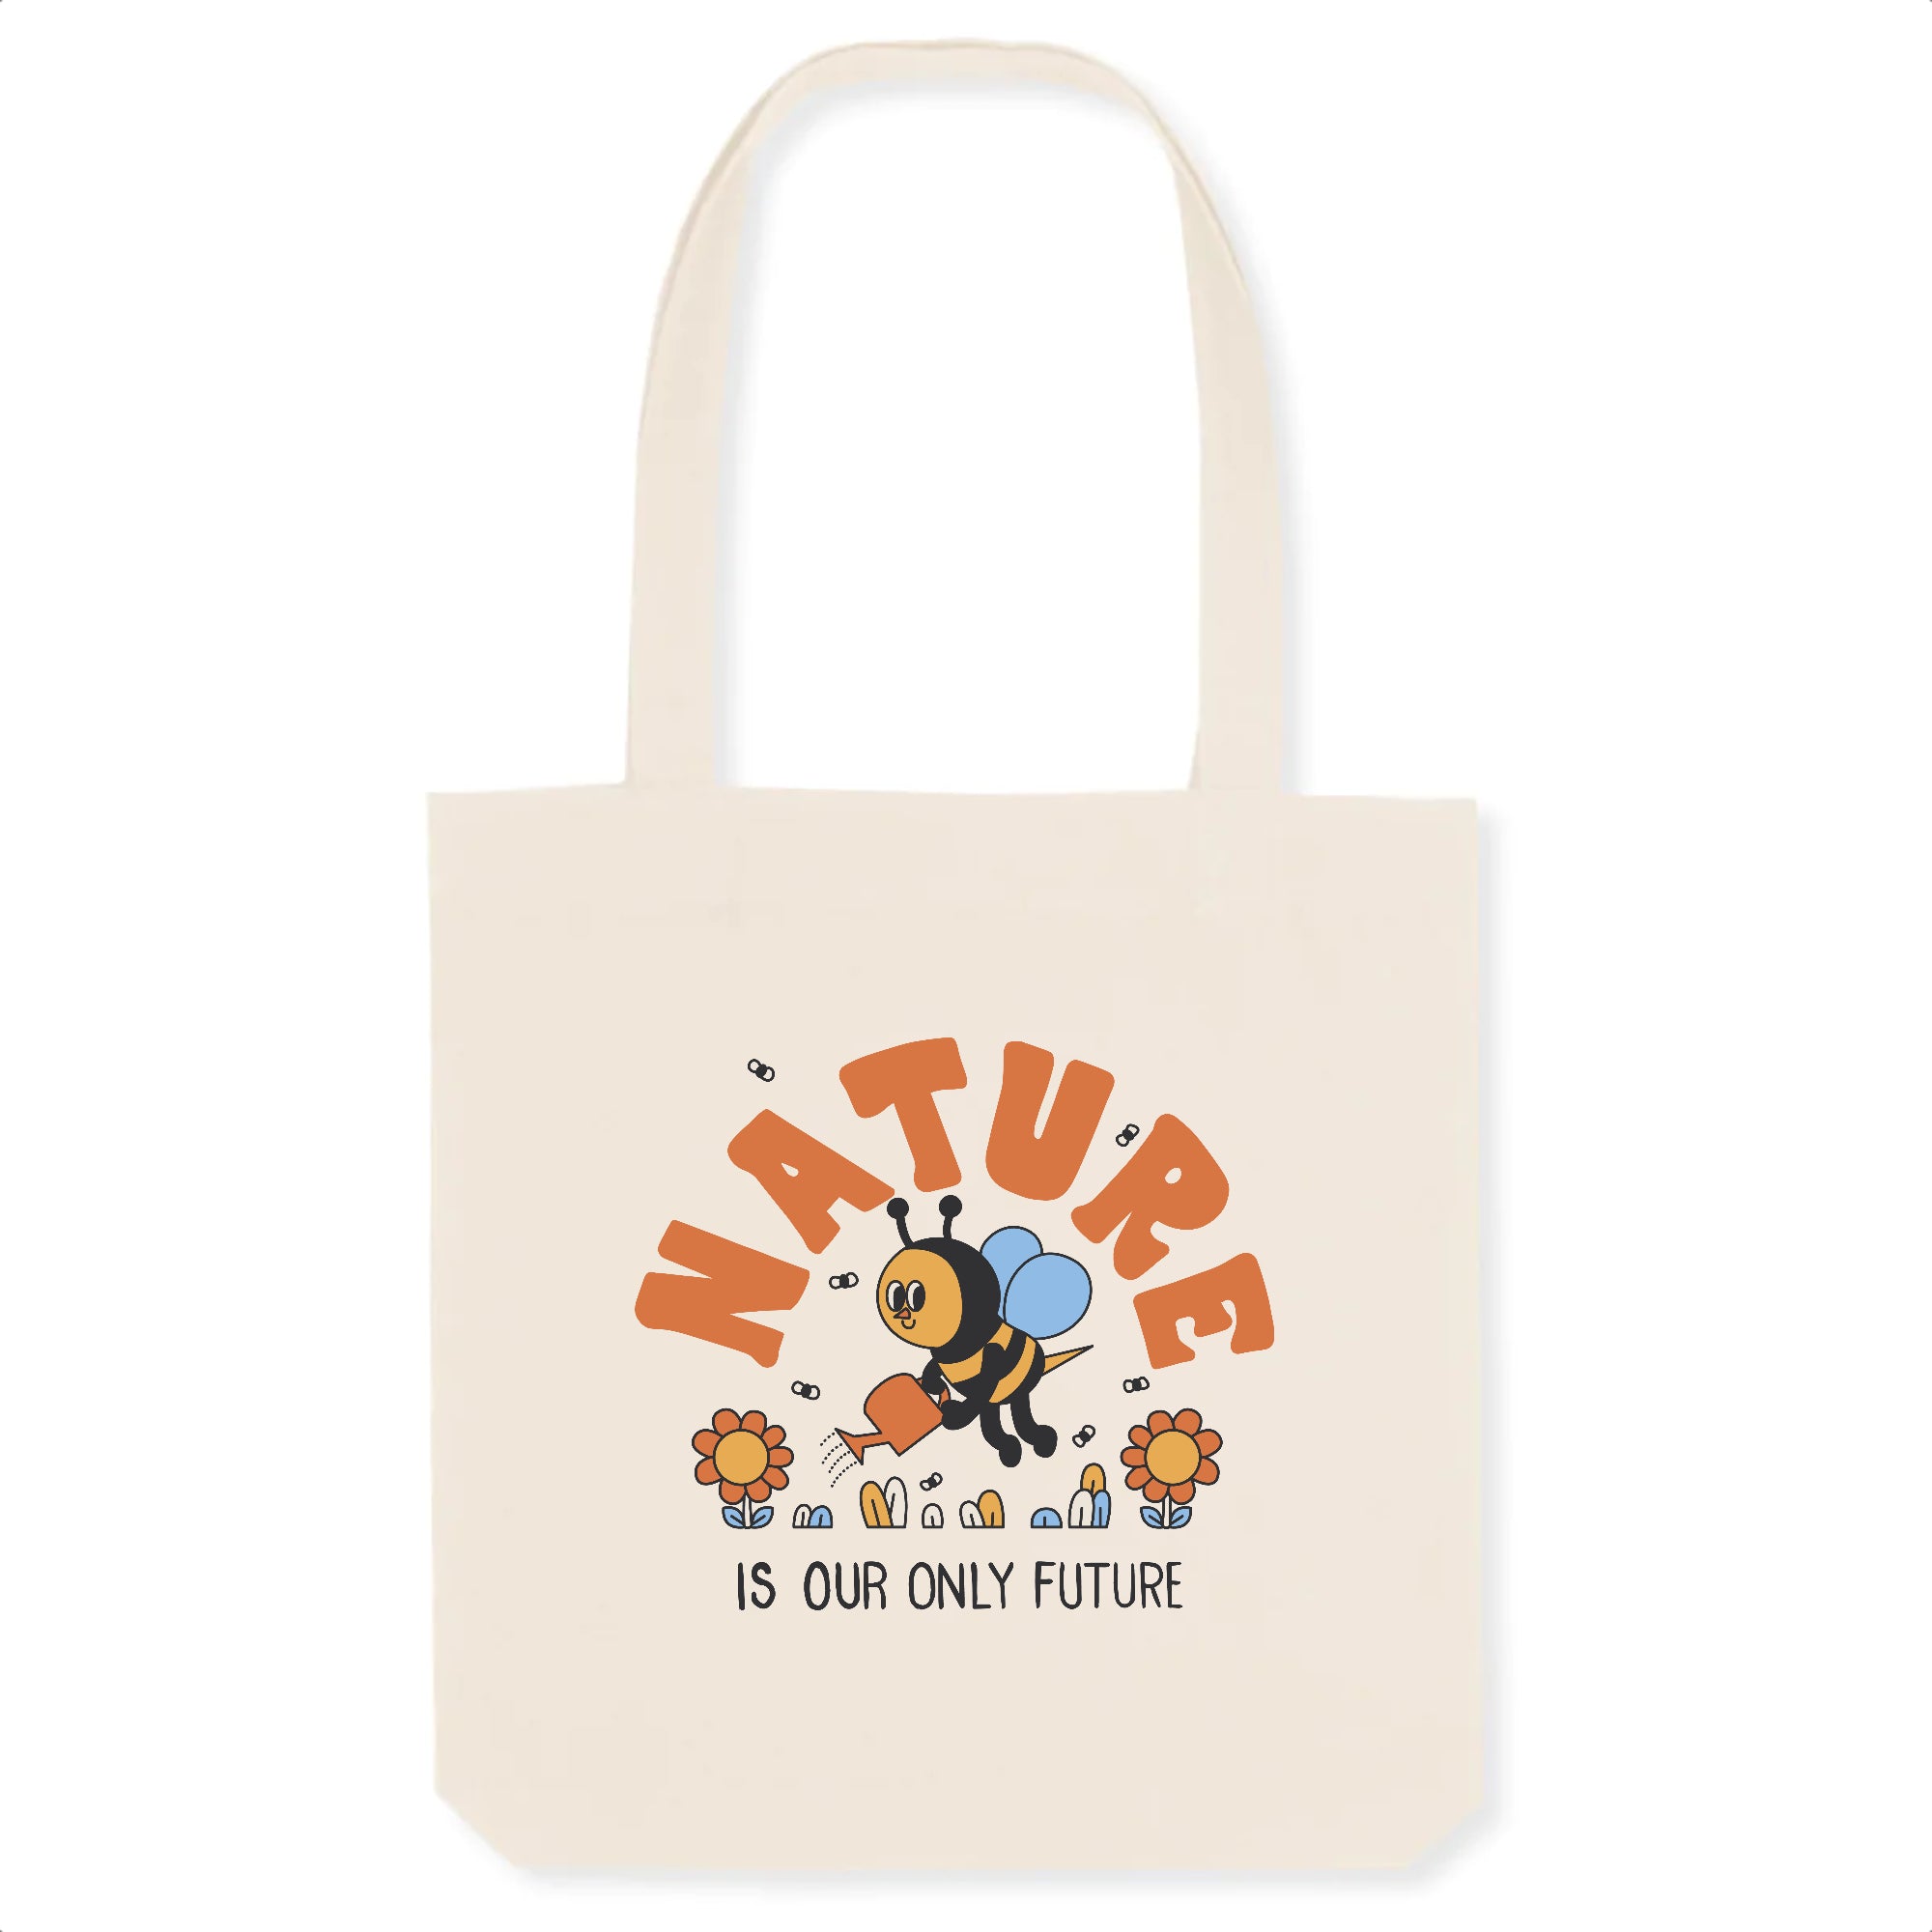 Tote Bag - NATURE is our only future